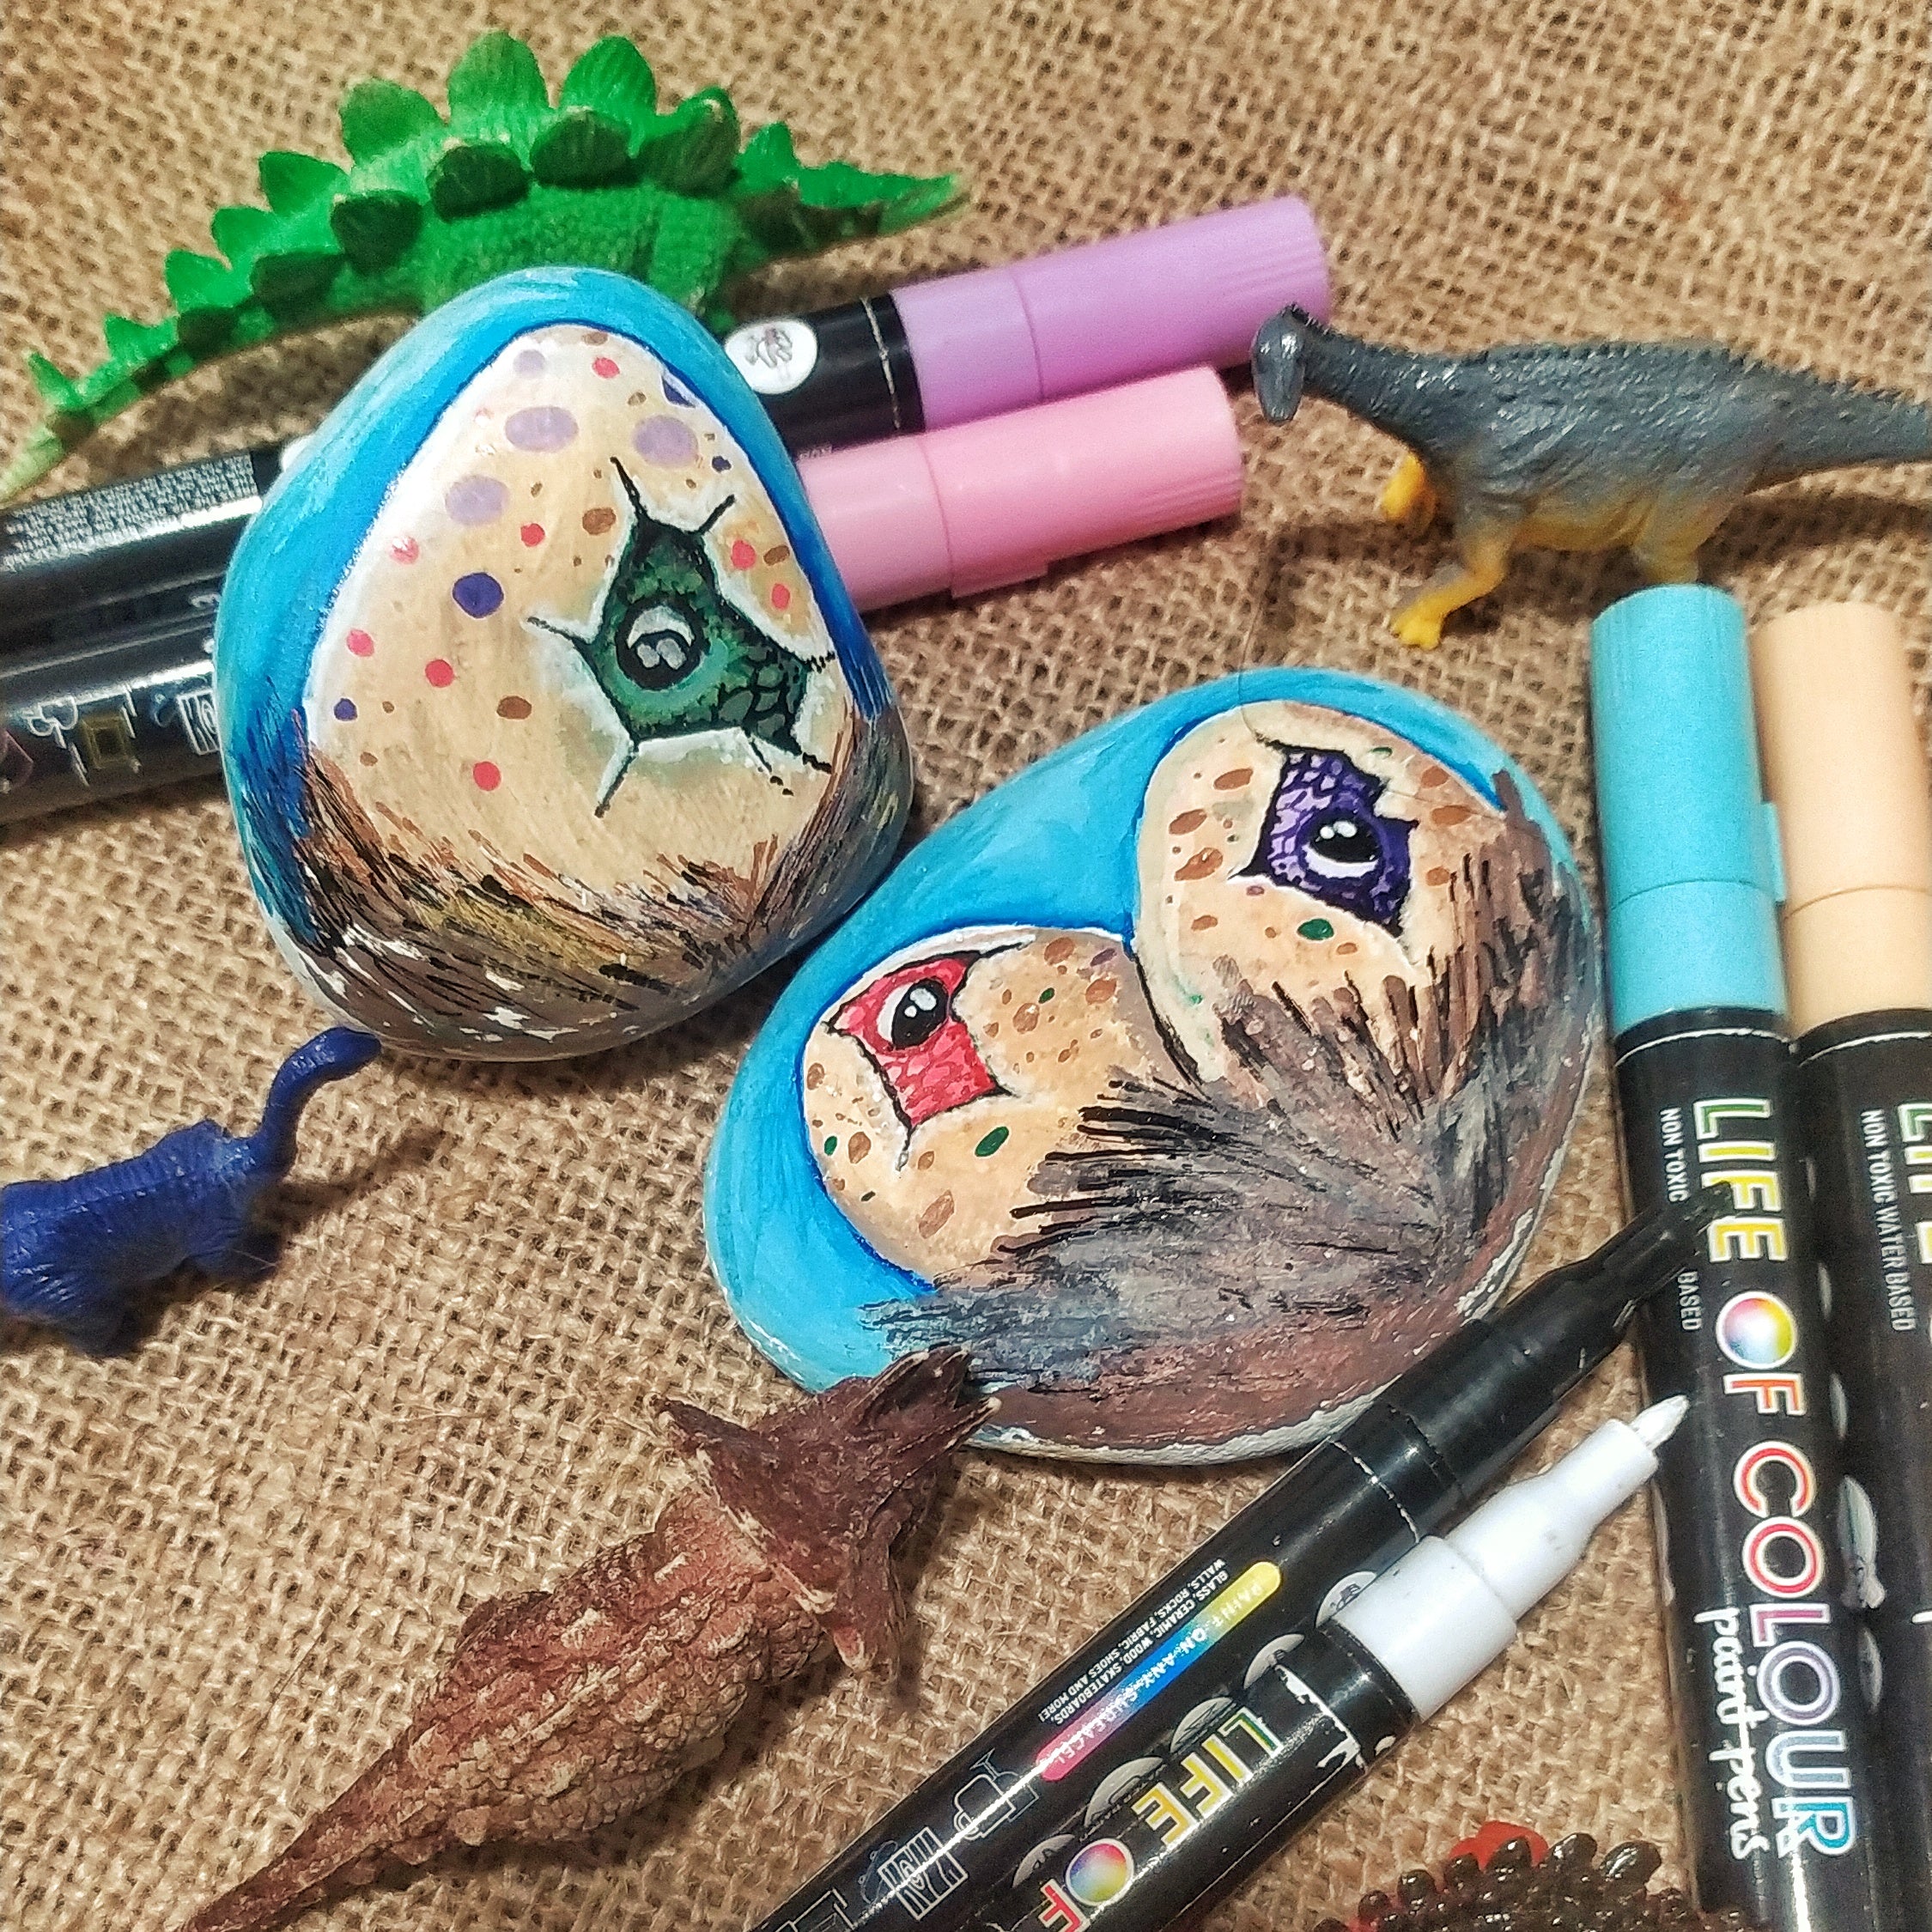 8 Paint Pens for Rock Painting - What I Use